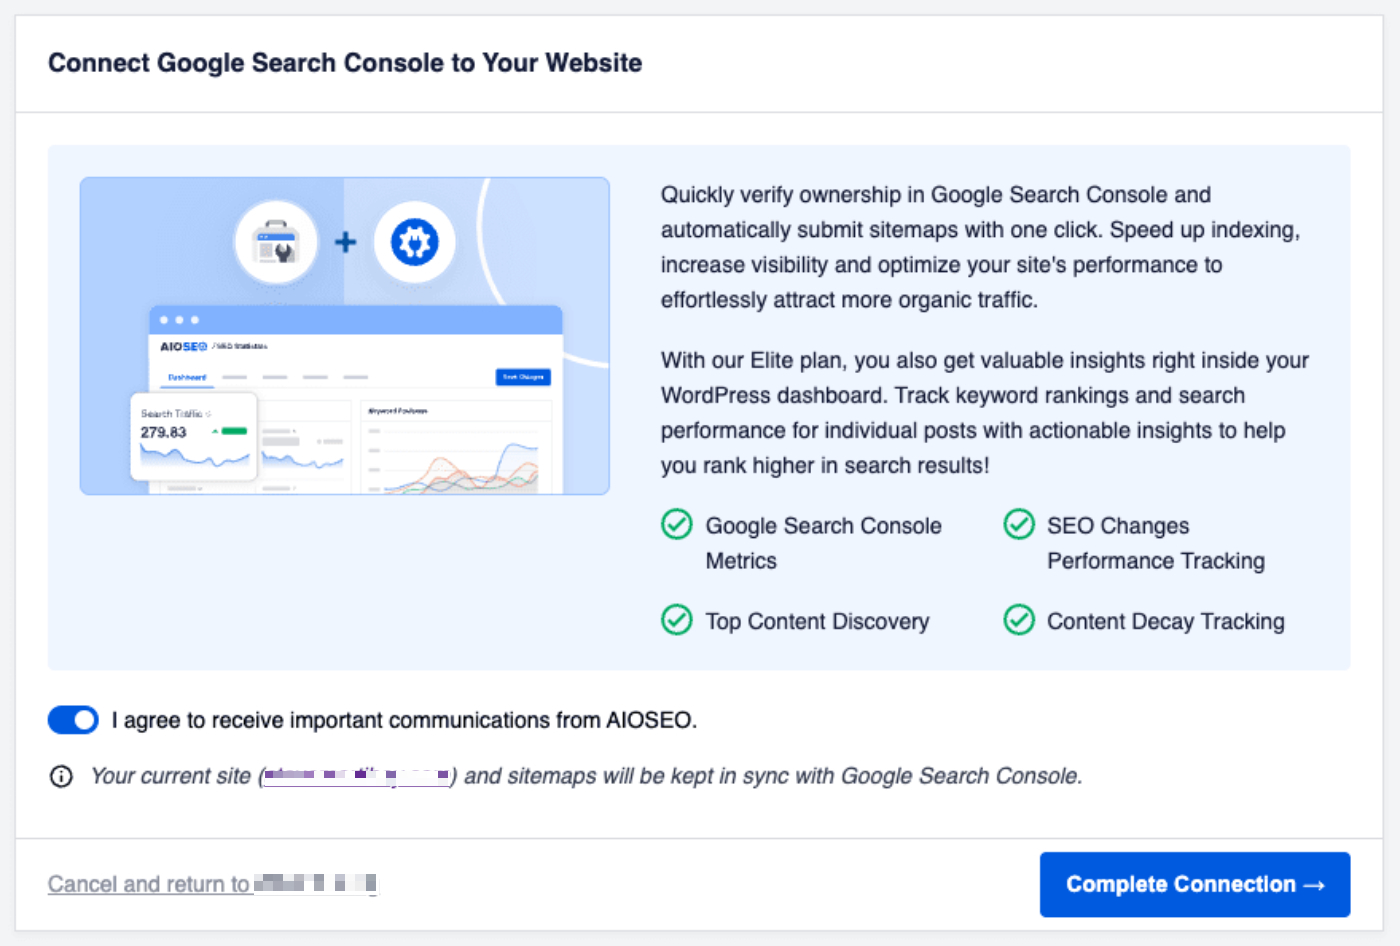 Complete connection screen for Google Search Console